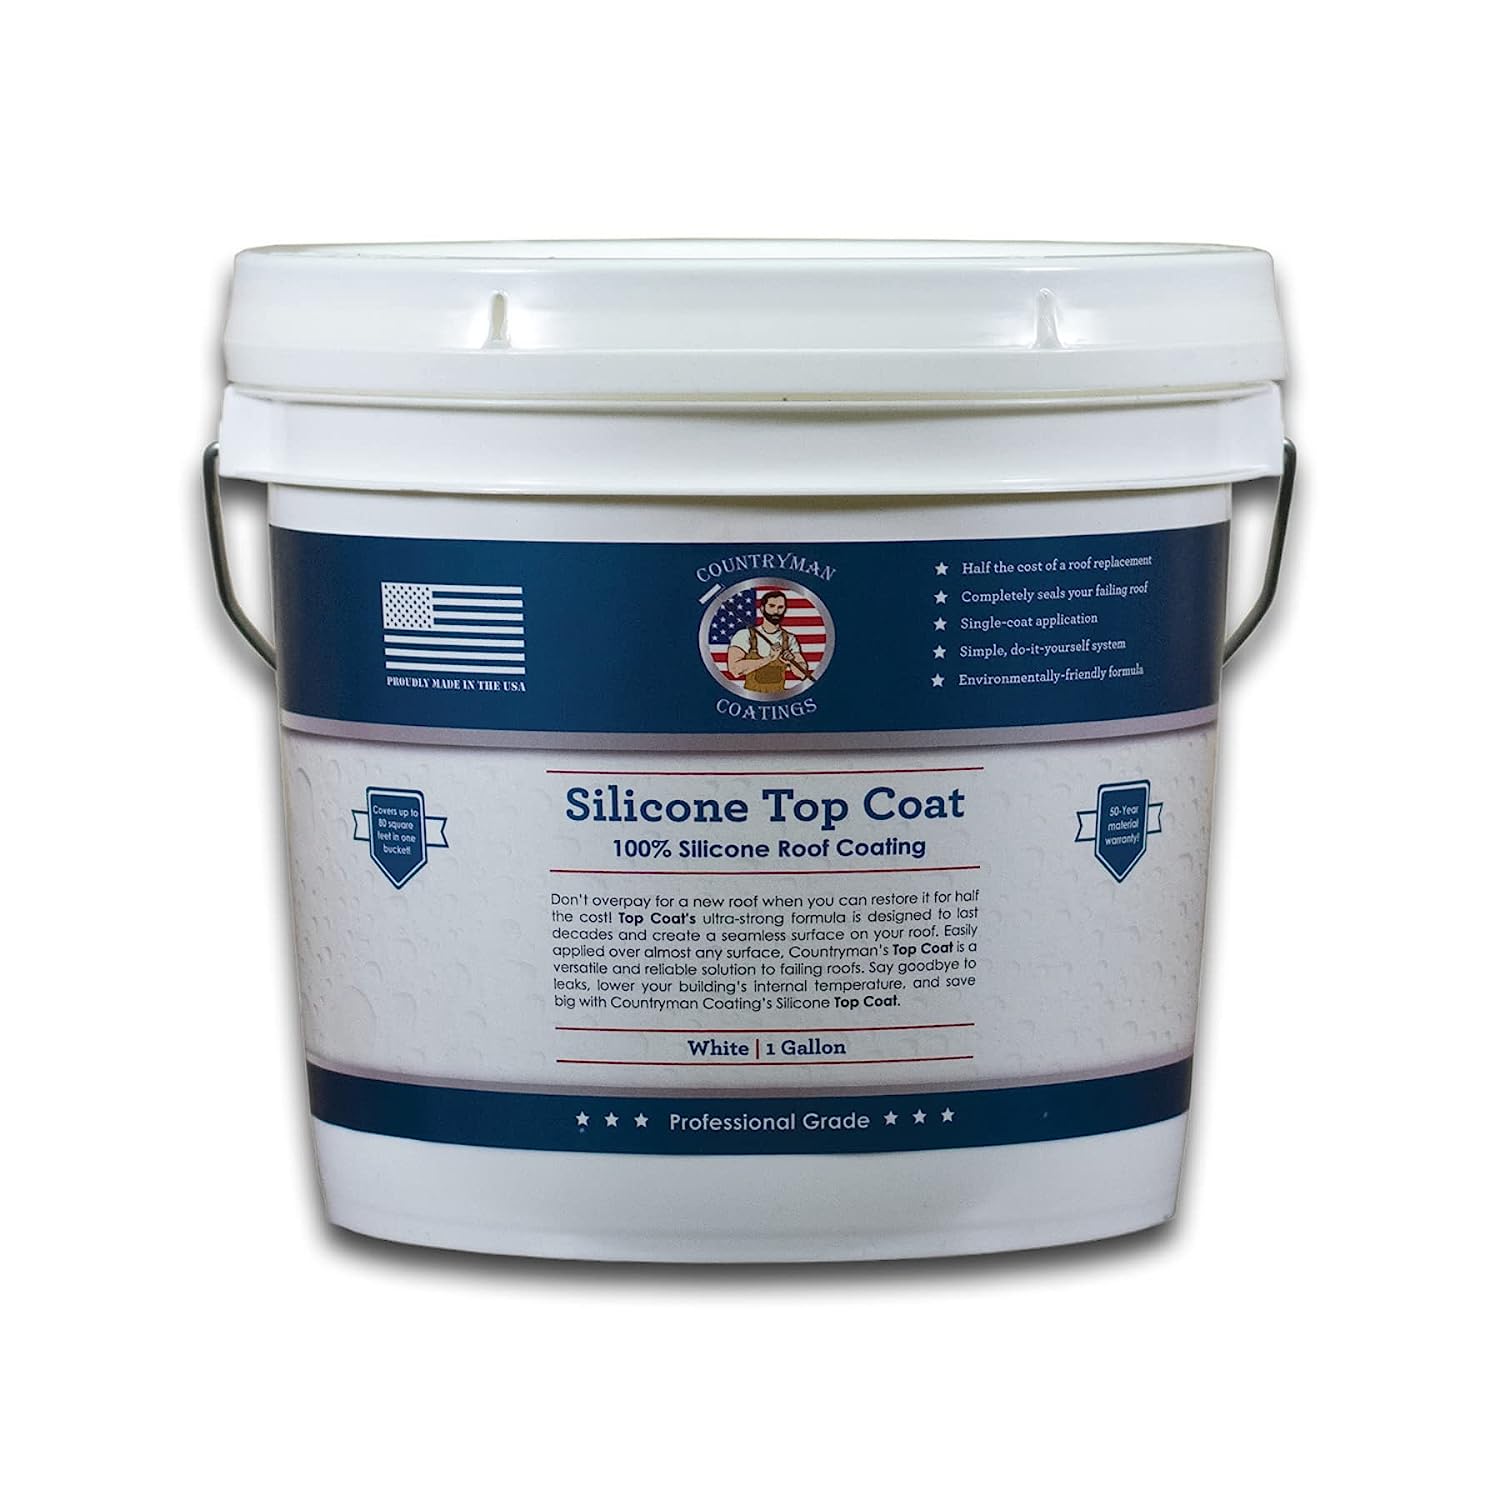 100% Silicone Roof Coating - Restore Your Roof in a [...]